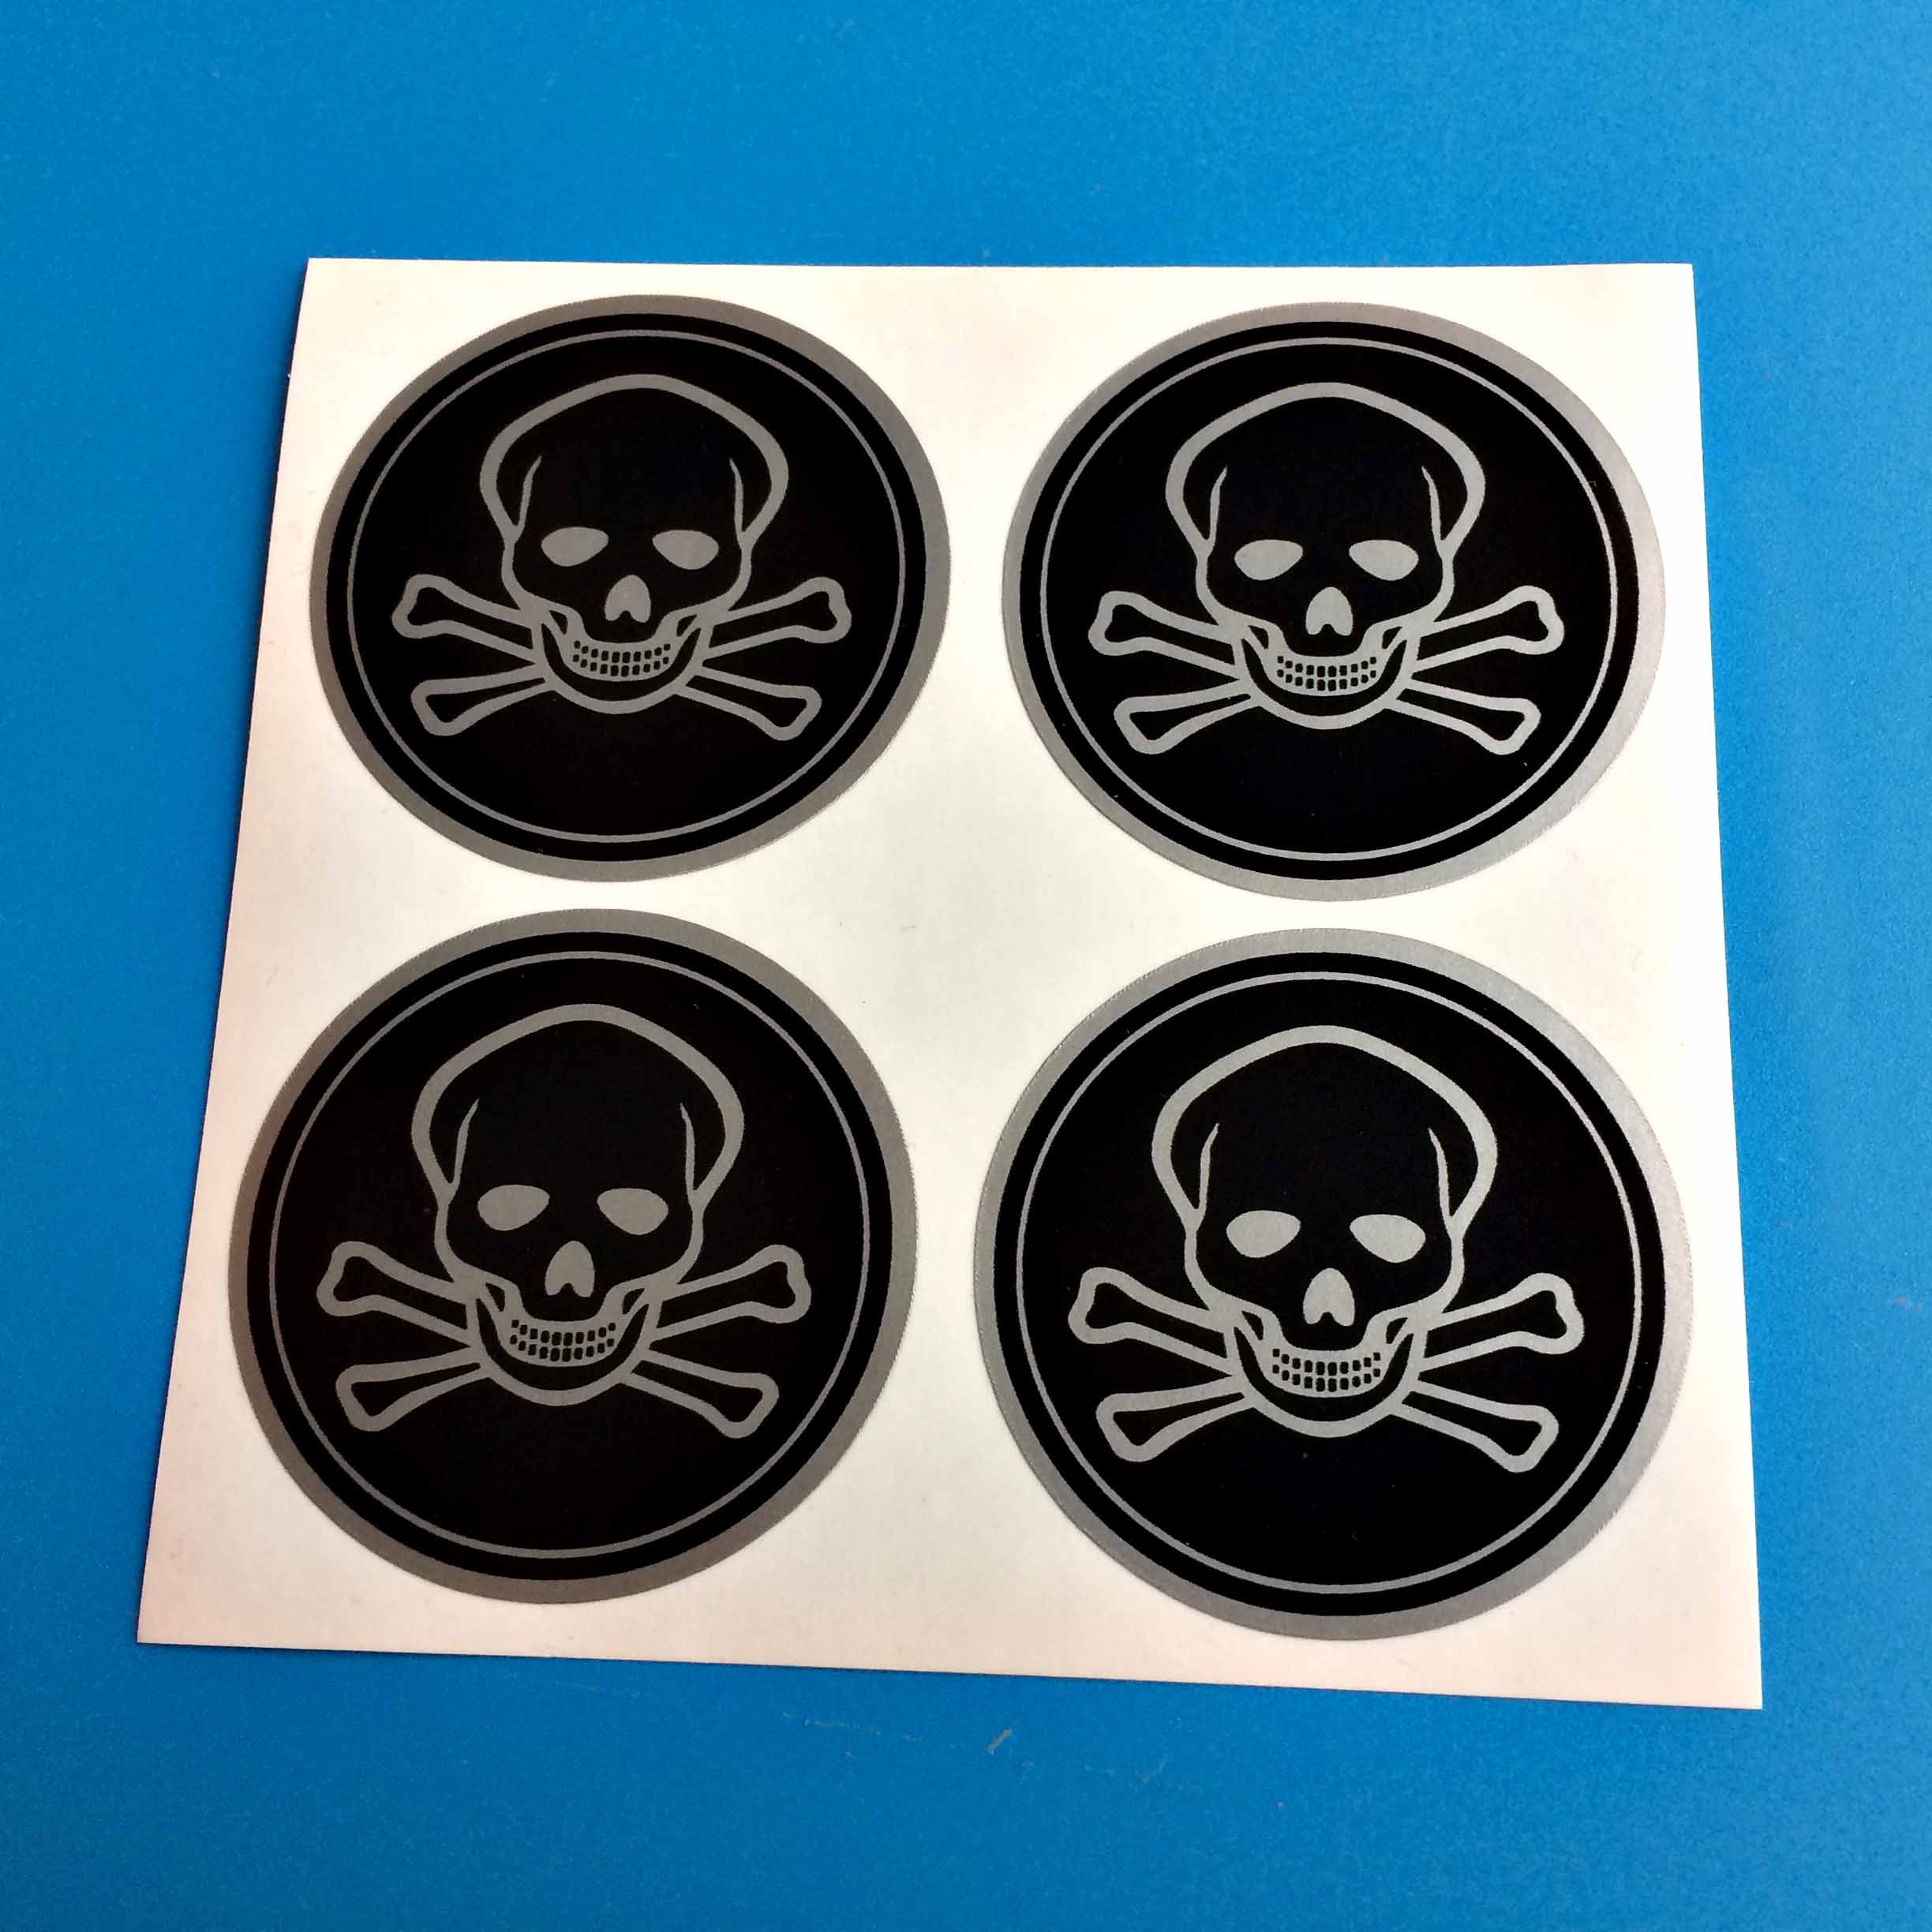 JOLLY ROGER PIRATES SKULL AND CROSSBONES STICKERS. The contour of a skull and crossbones in silver on a black background. A circular sticker with a silver border.